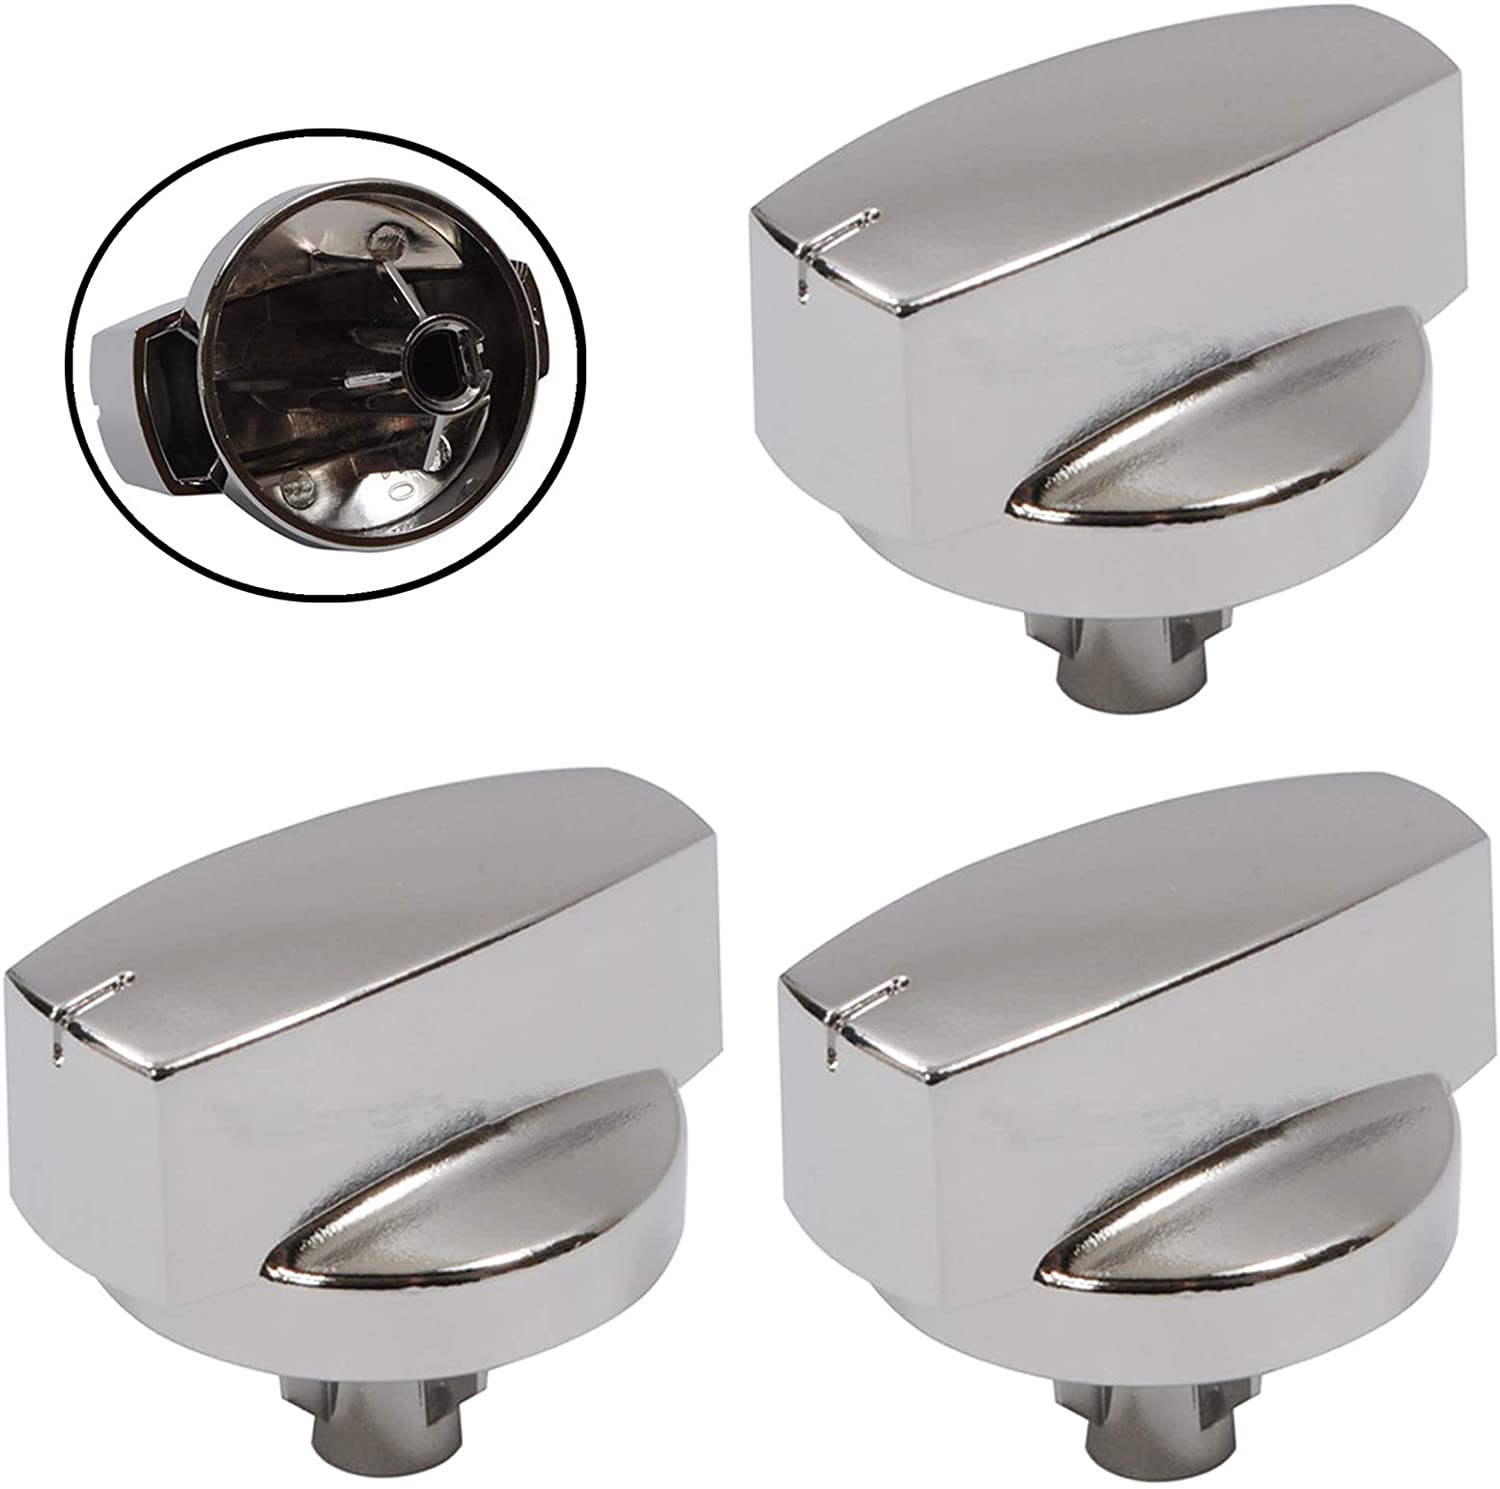 STOVES Oven Cooker Knob Function Control Switch 444445412 (Silver/Chrome) Pack of 3